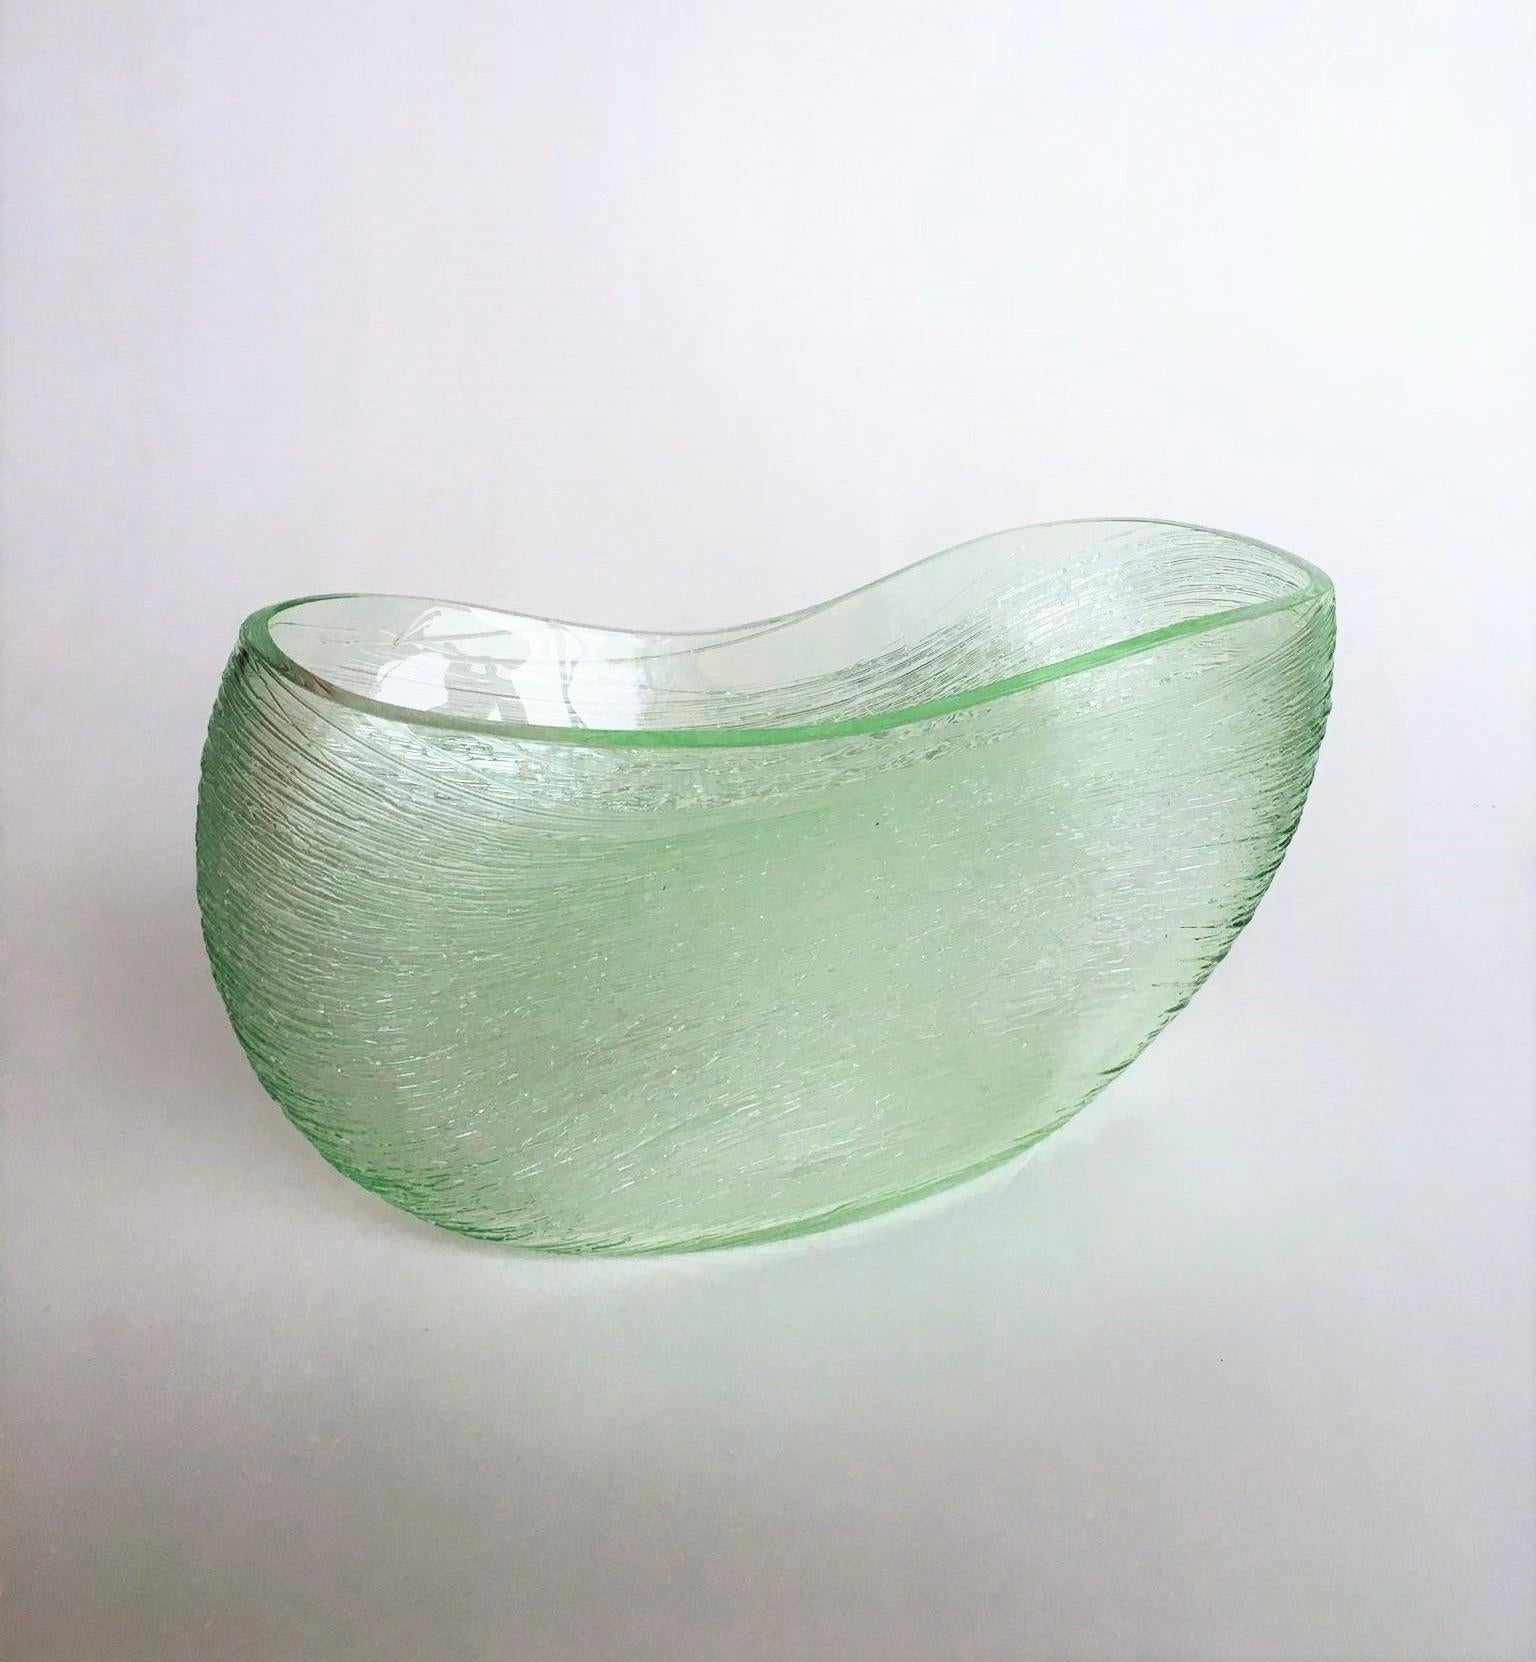 Bibi Smit
Oval Fluid Form, green
H17cm-31cm-D11 cm 
Blown glass

Bibi Smit (b. 1965) lives and works in the Netherlands. She is a glass artist and designer. She feels the need to control all the processes, from the idea and the design to the